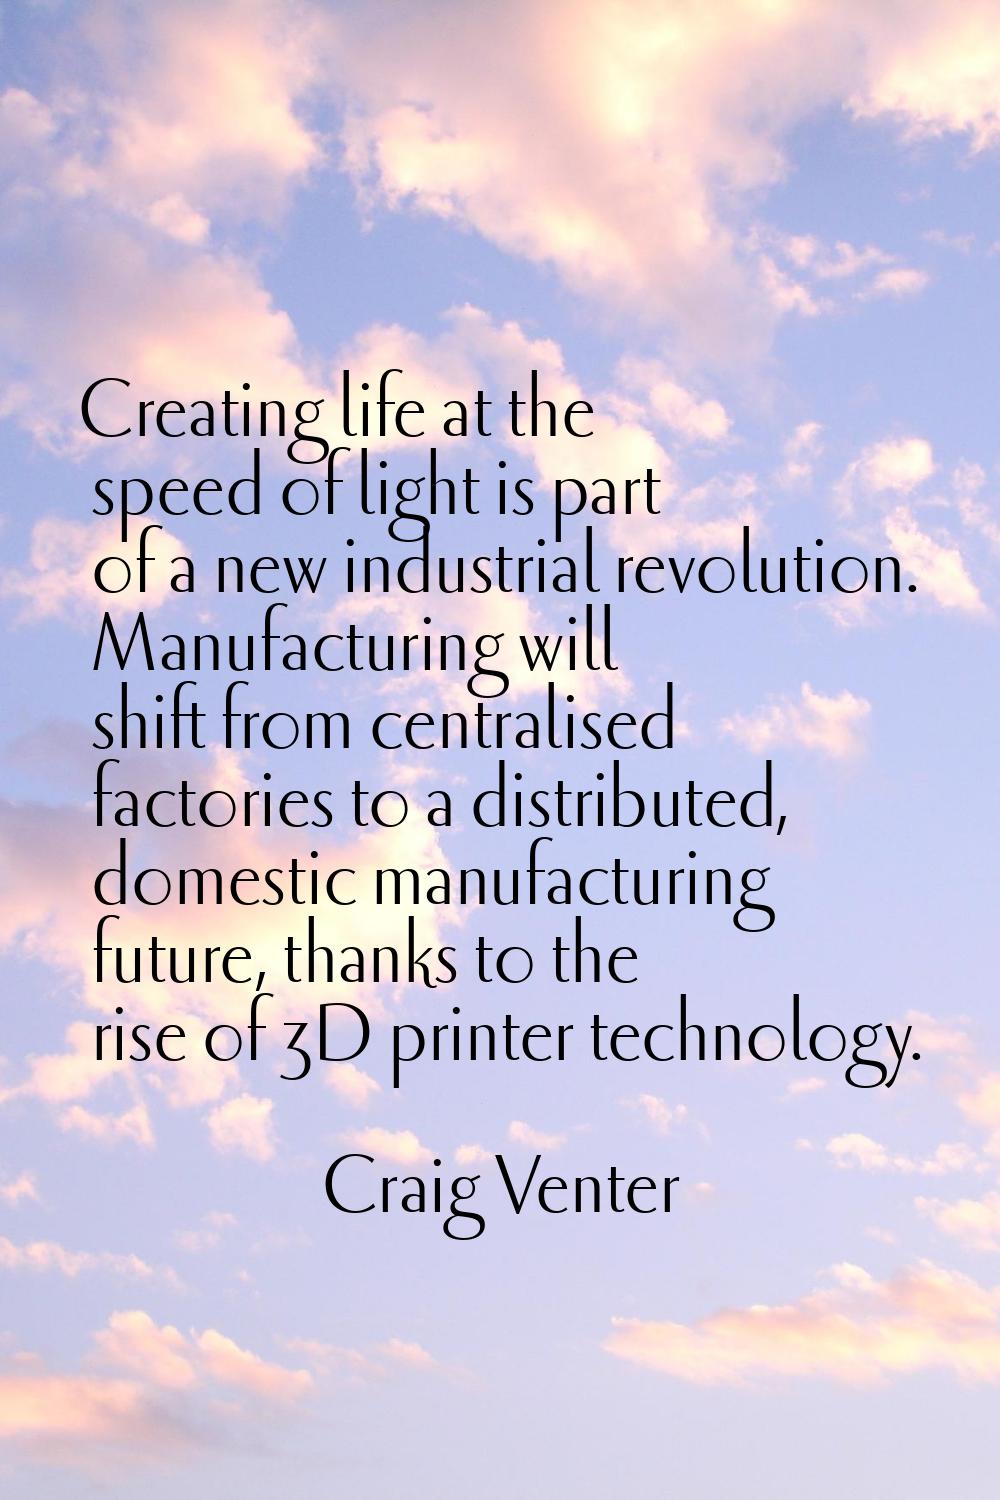 Creating life at the speed of light is part of a new industrial revolution. Manufacturing will shif